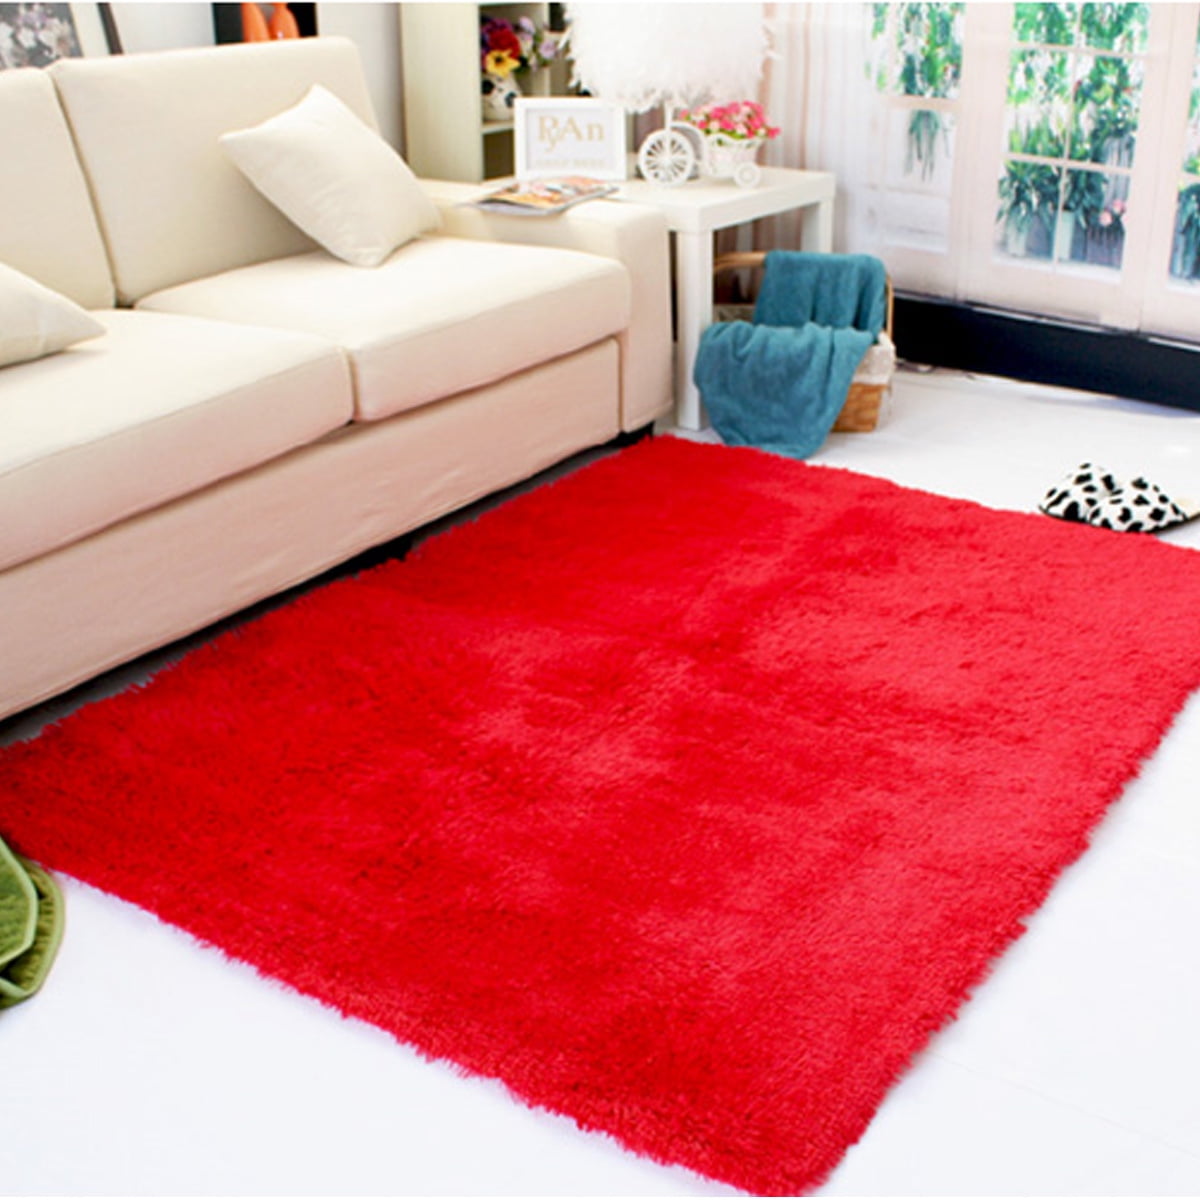 Beige Ultra Soft Fluffy Area Rugs for Bedroom Living Room Kids Room Modern Home Decor 2 ft x 3 ft Child and Girls Baby Room Warm Carpet Luxury Shaggy Furry Floor Mats 